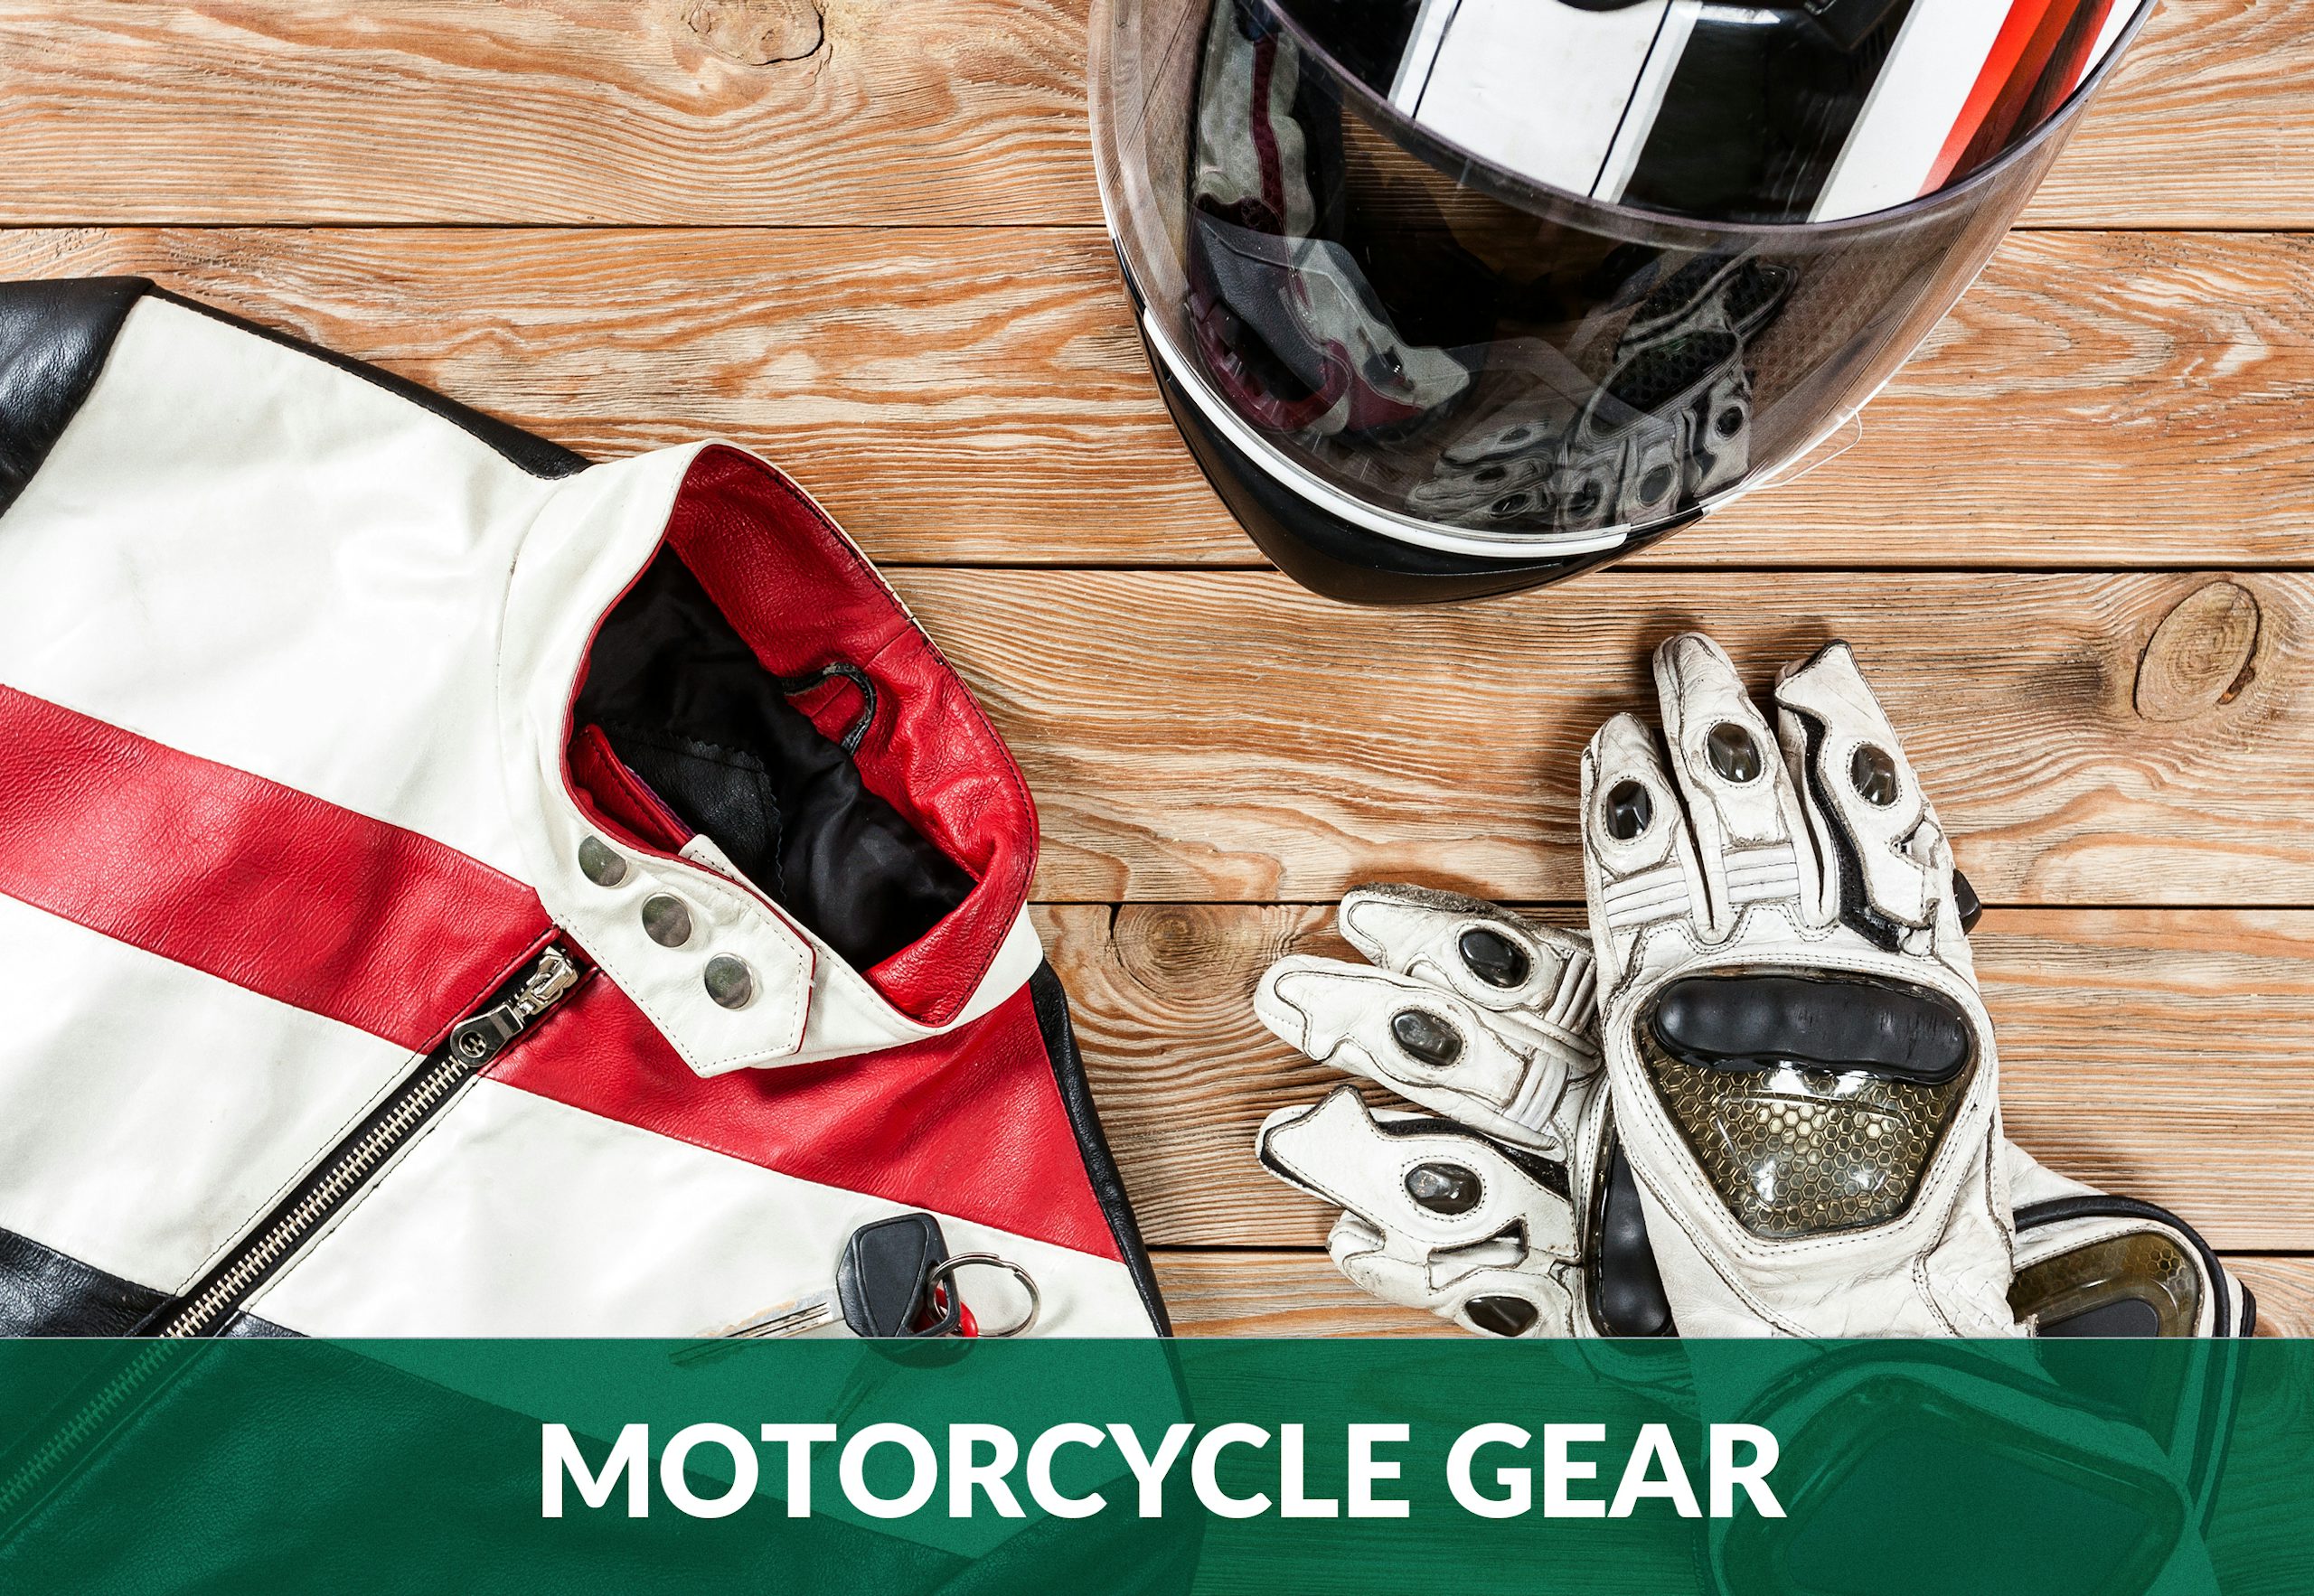 Motorcycle gear for new riders